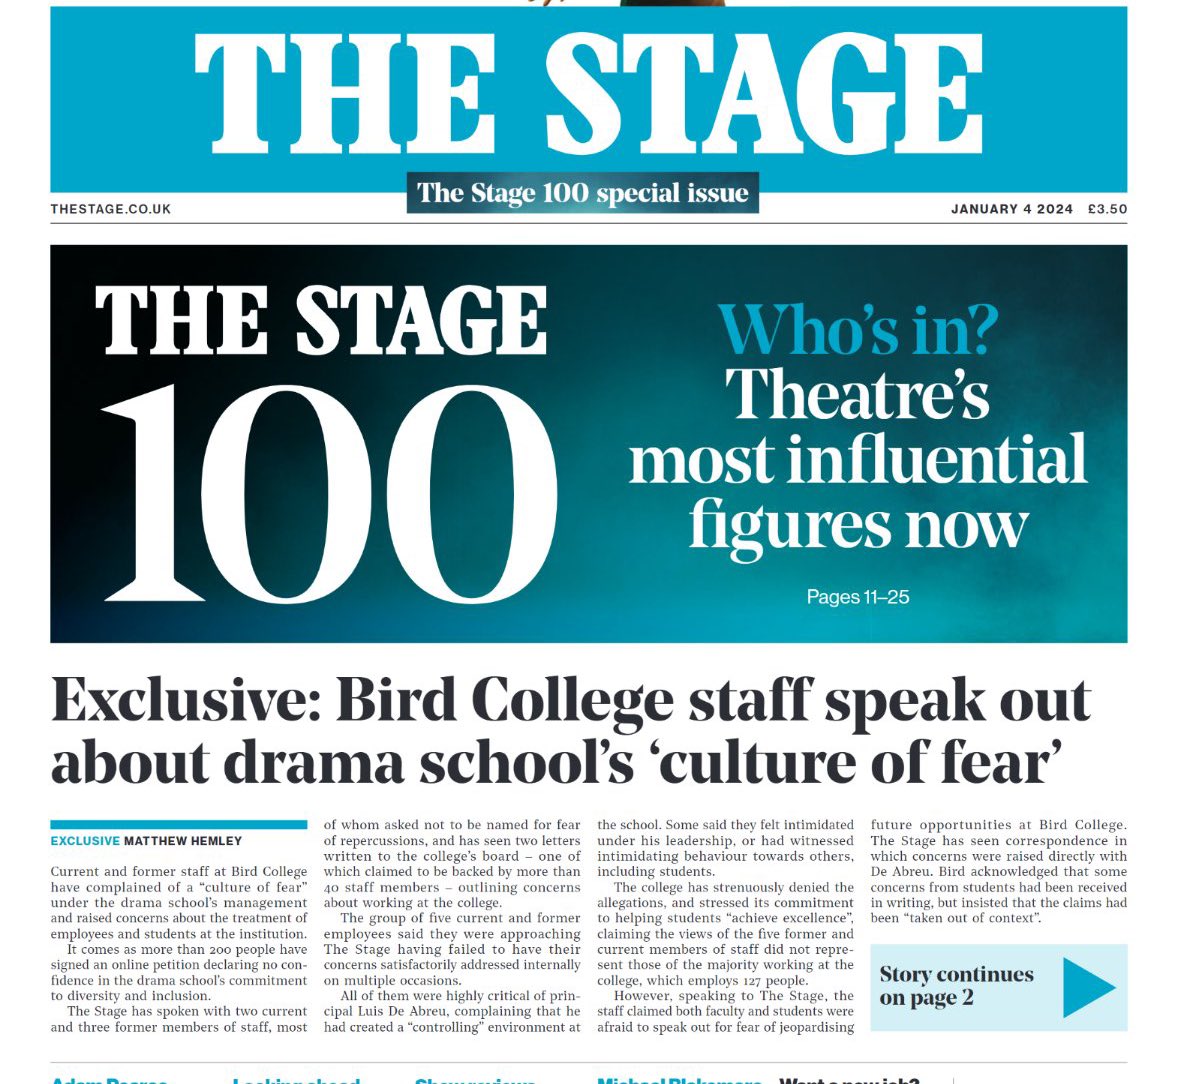 First week of 2024 & we’re back with a bang. Our front page drama school story was one I have been working on since October. Took a while but I’m grateful to those who shared their stories with me. And thankful for subscribers - whose support means we can do stories like this!